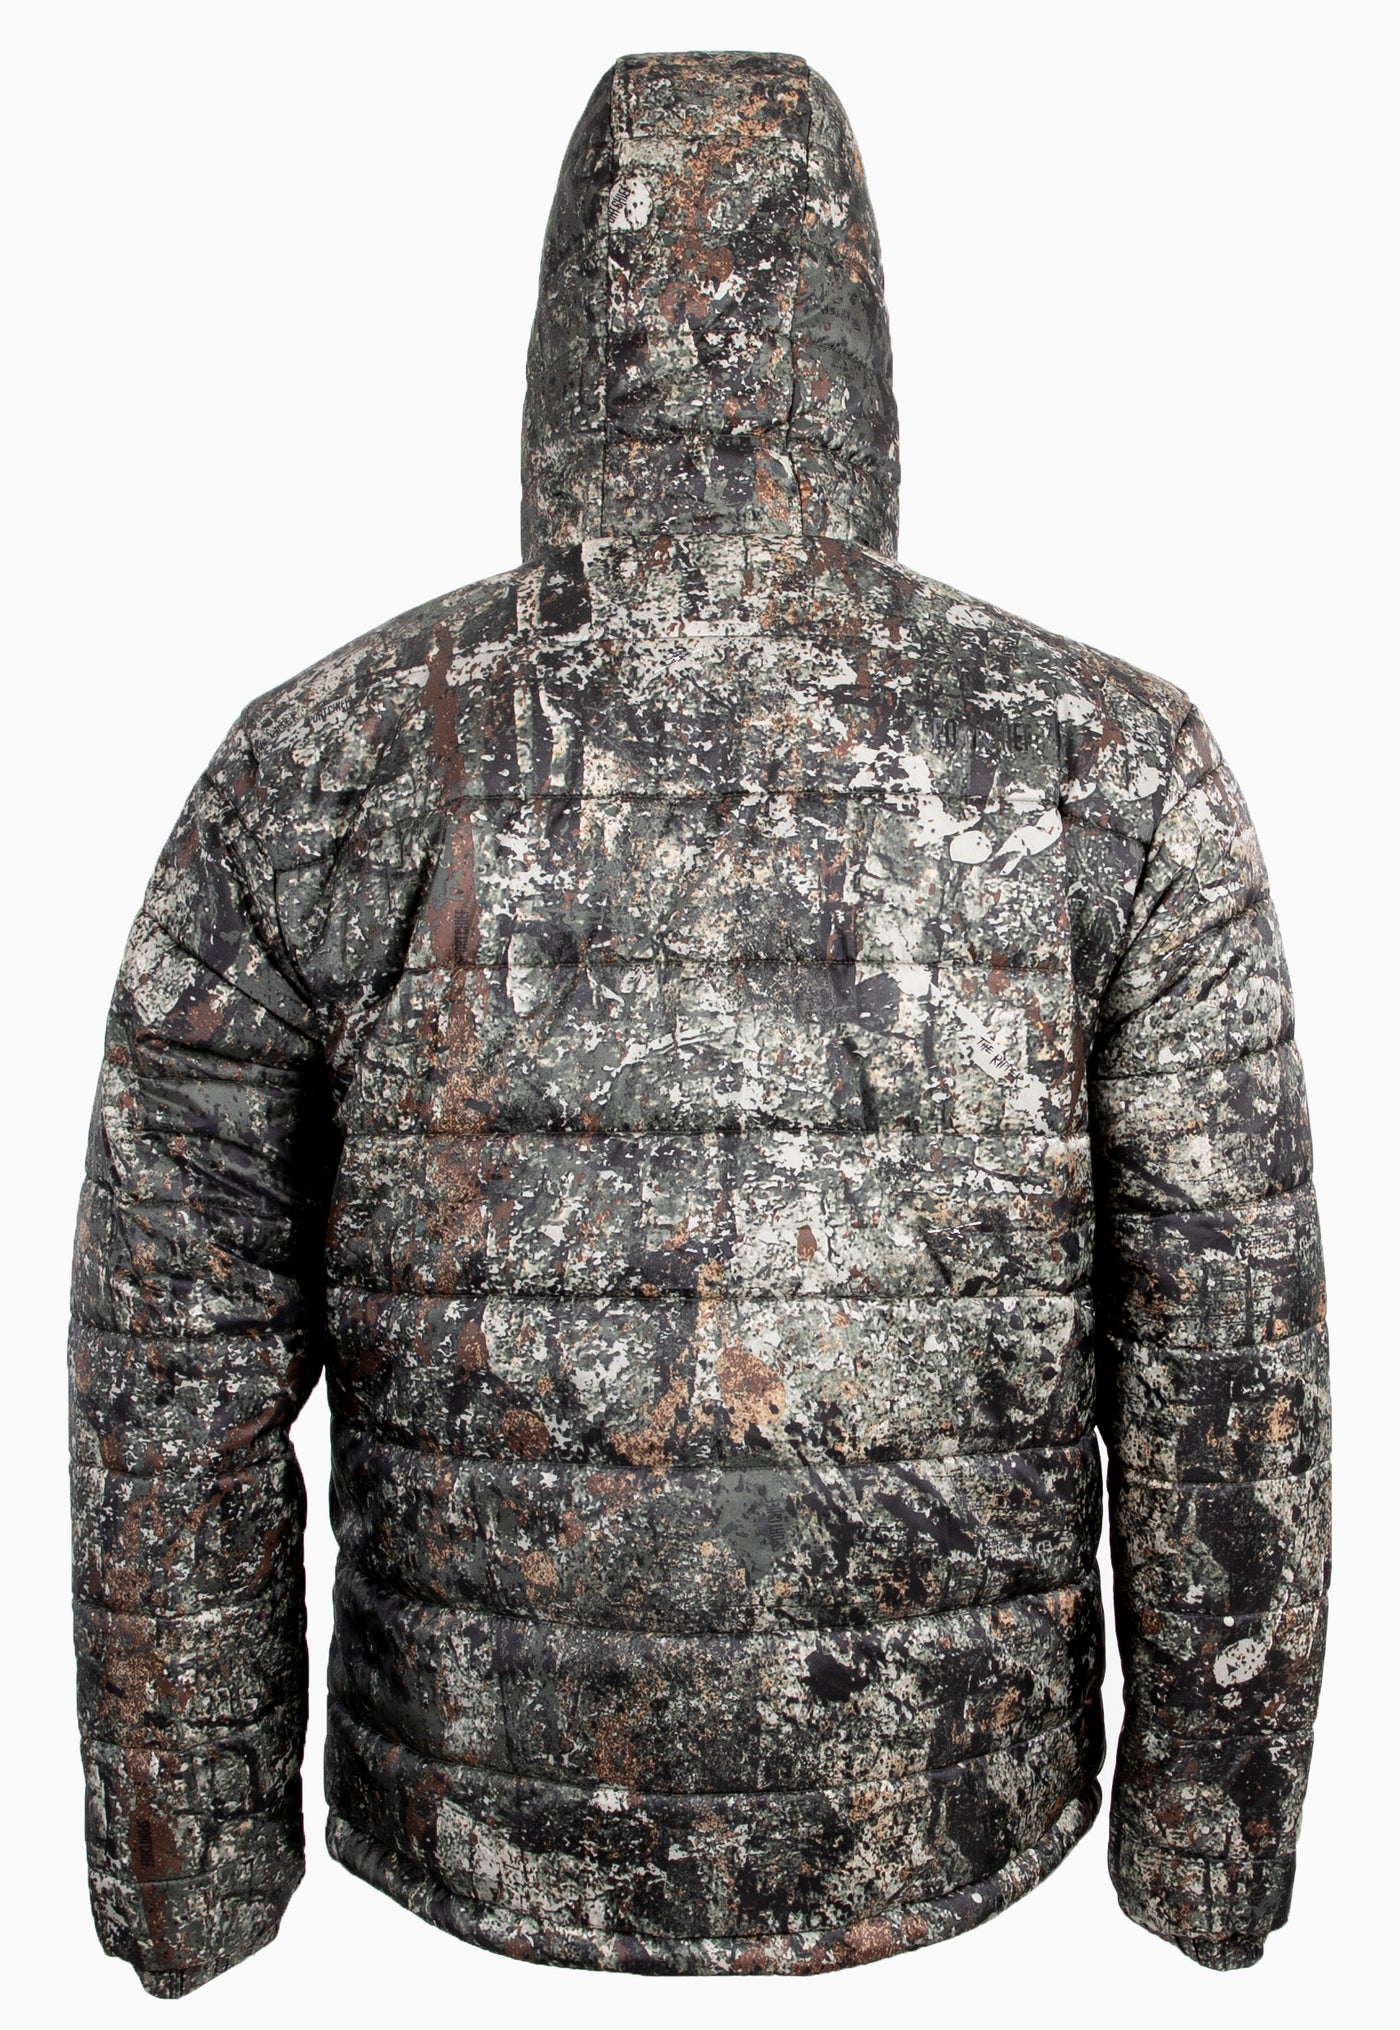 Sportchief "Wilson" camo The Ripper men's hunting jacket